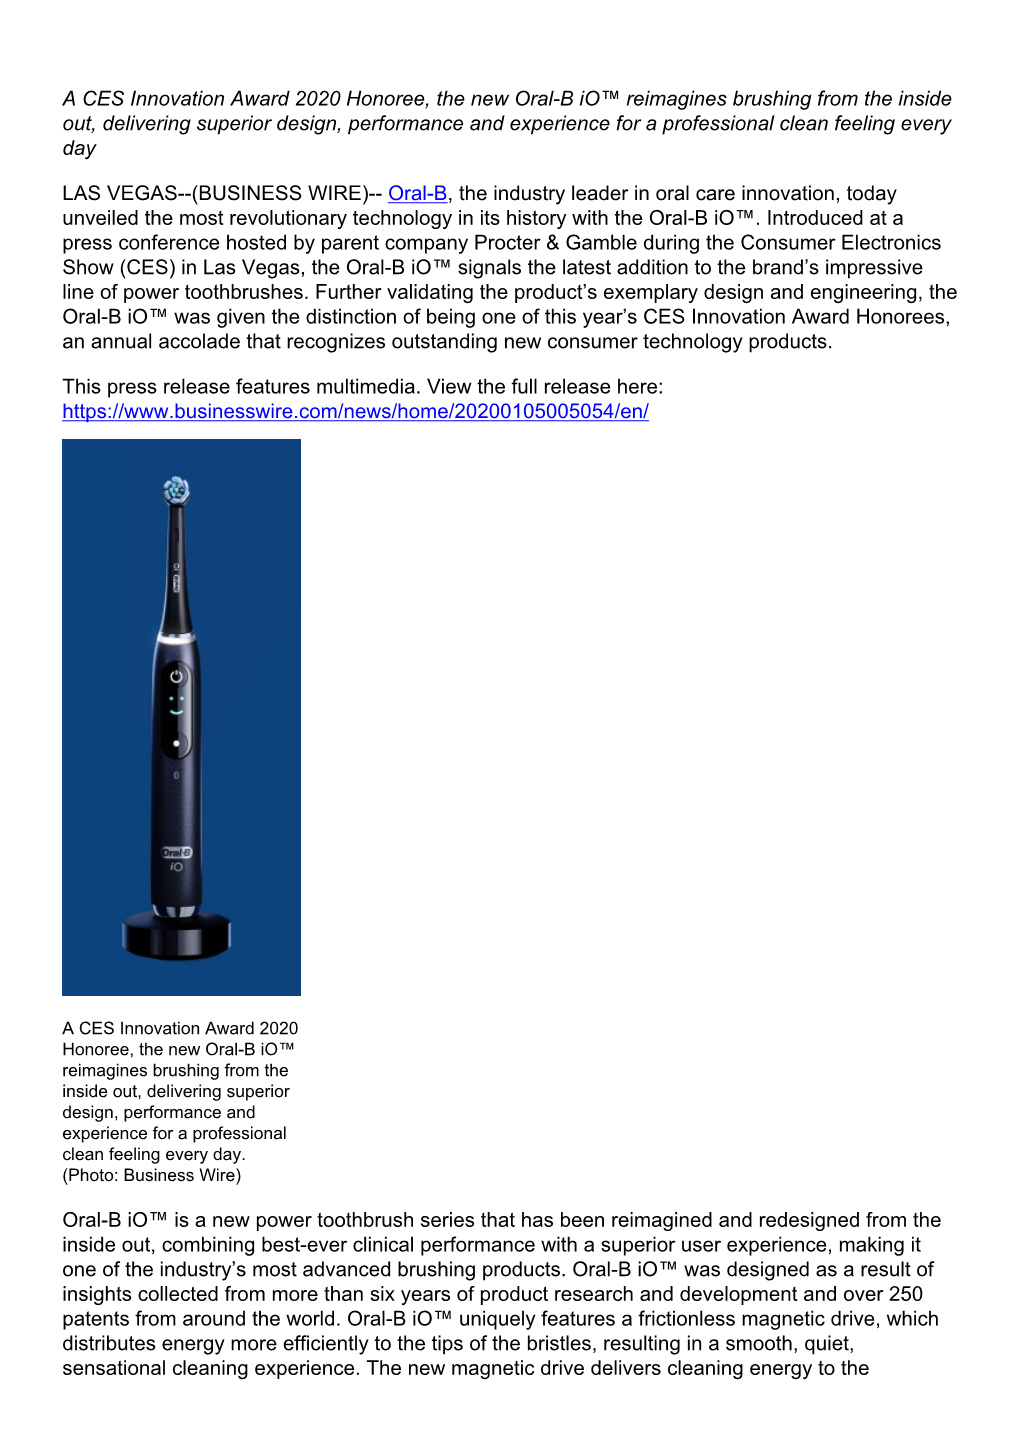 A CES Innovation Award 2020 Honoree, the New Oral-B Io